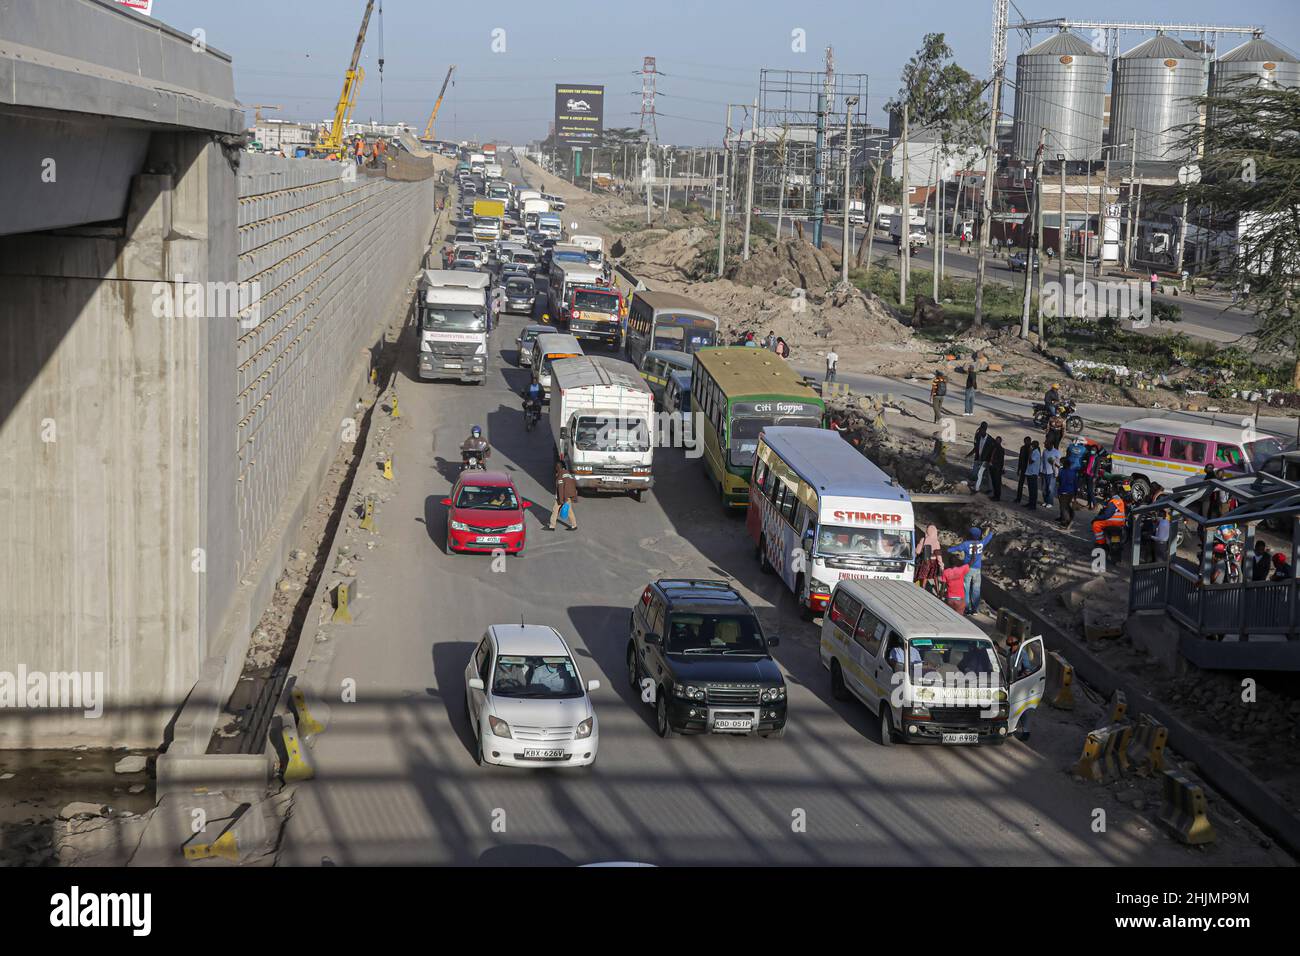 Nairobi, Kenya. 26th Jan, 2022. Traffic pilling up at a temporary bus stop at General motors area a section of the road that is almost complete of the Nairobi Expressway Project along the Mombasa road.The construction of the 27.1km long toll highway, the Nairobi Expressway continues and scheduled to be completed in June 2022. The Nairobi Expressway is meant to decongest the Nairobi city by providing faster and reliable transport. (Credit Image: © Boniface Muthoni/SOPA Images via ZUMA Press Wire) Stock Photo